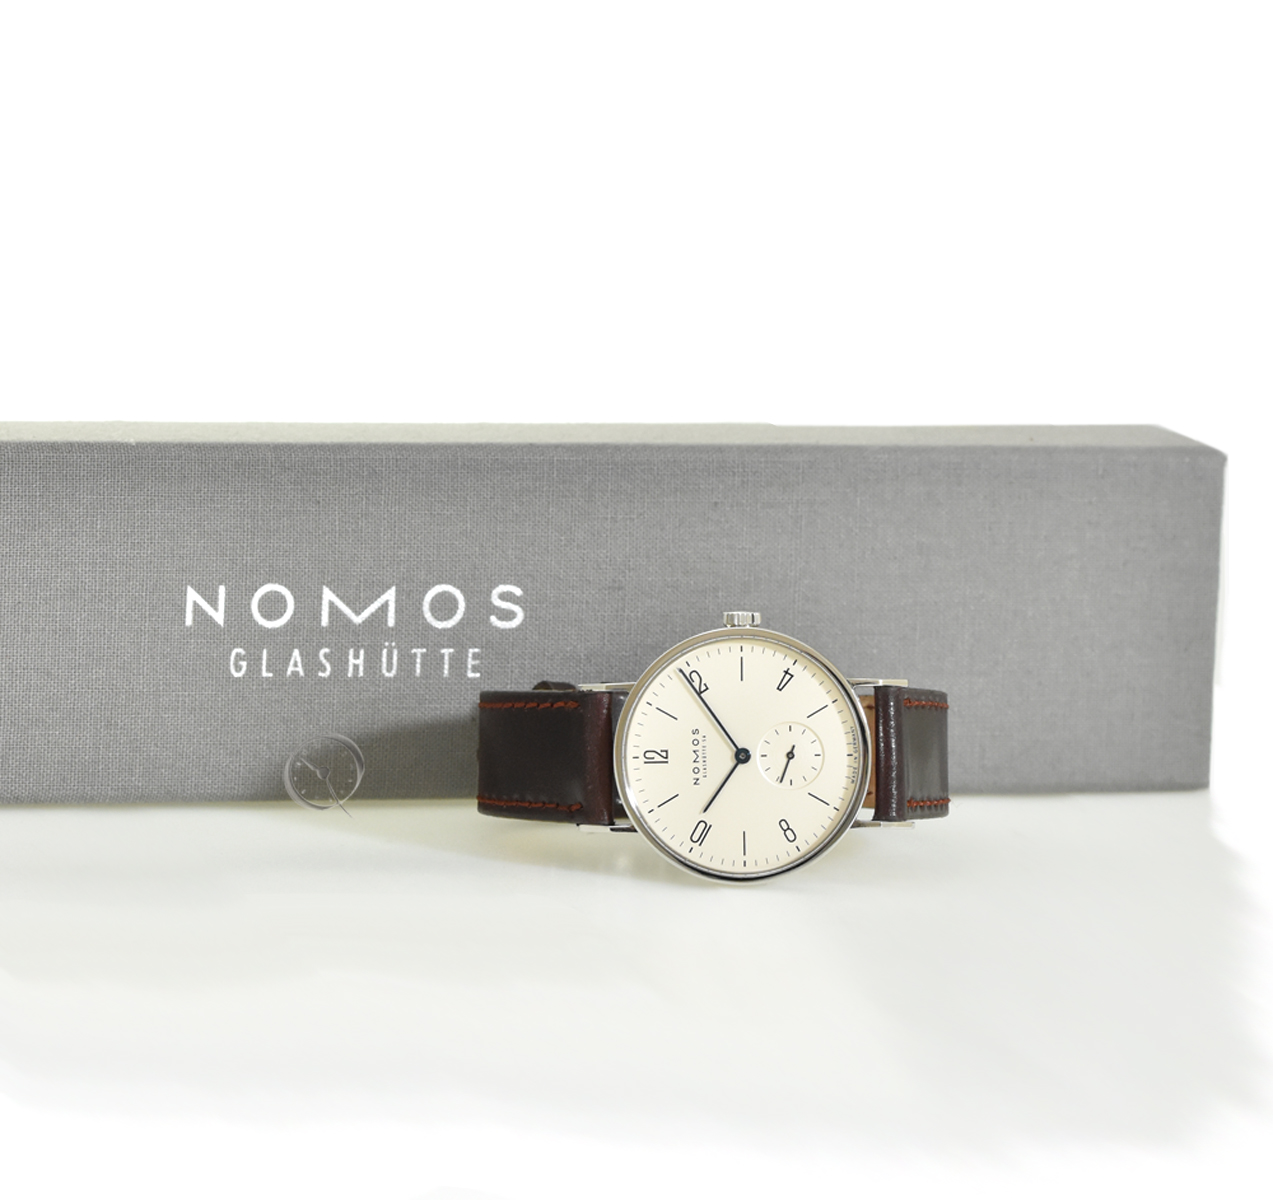 Nomos Tangente standard price limited edition of 500 pieces - very rare!